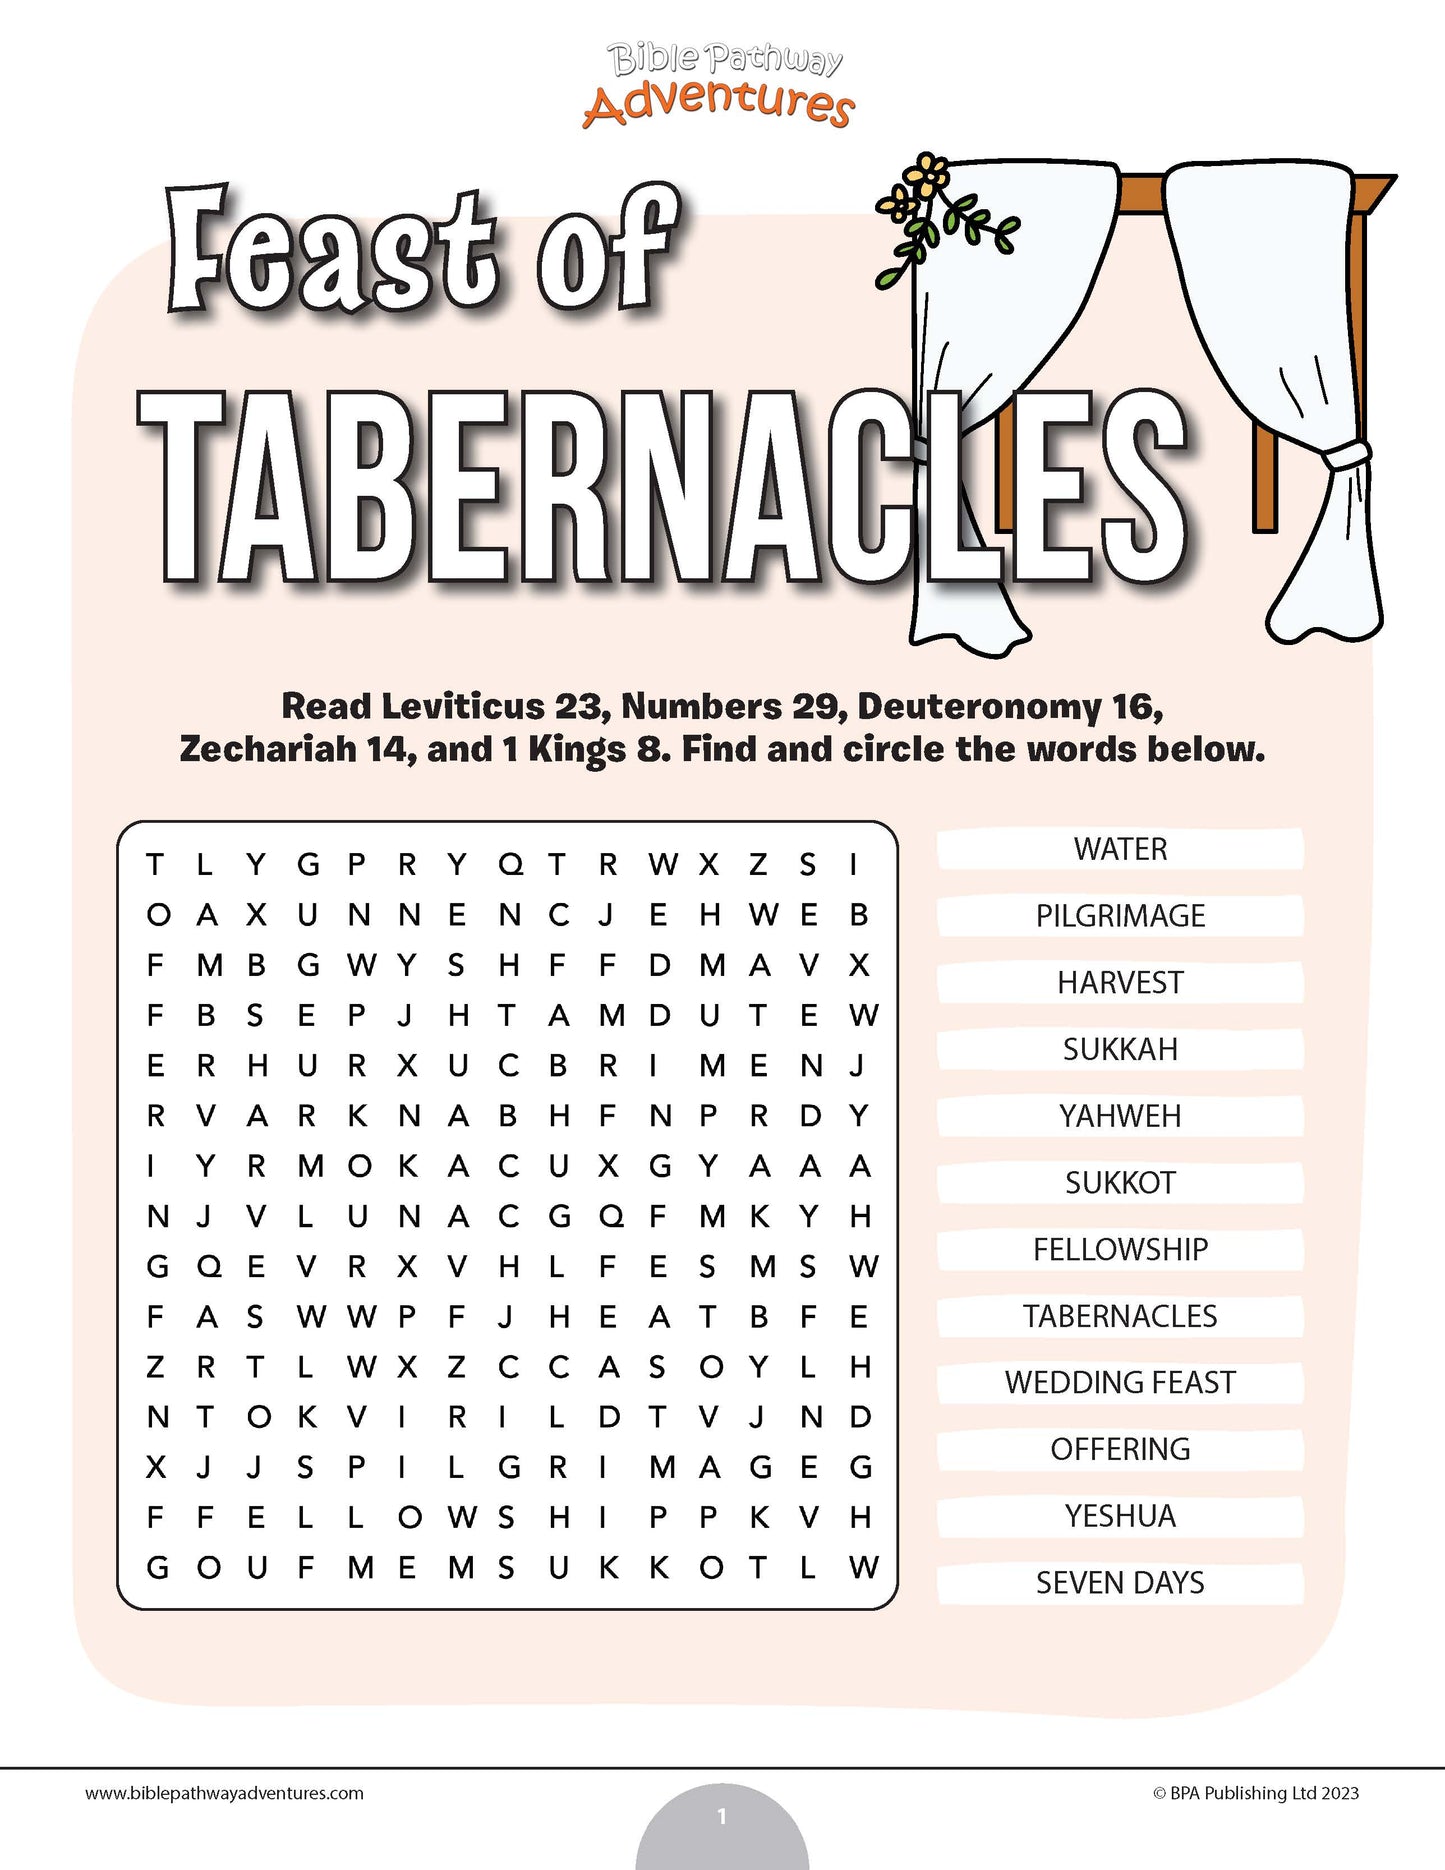 Feast of Tabernacles word search (PDF)